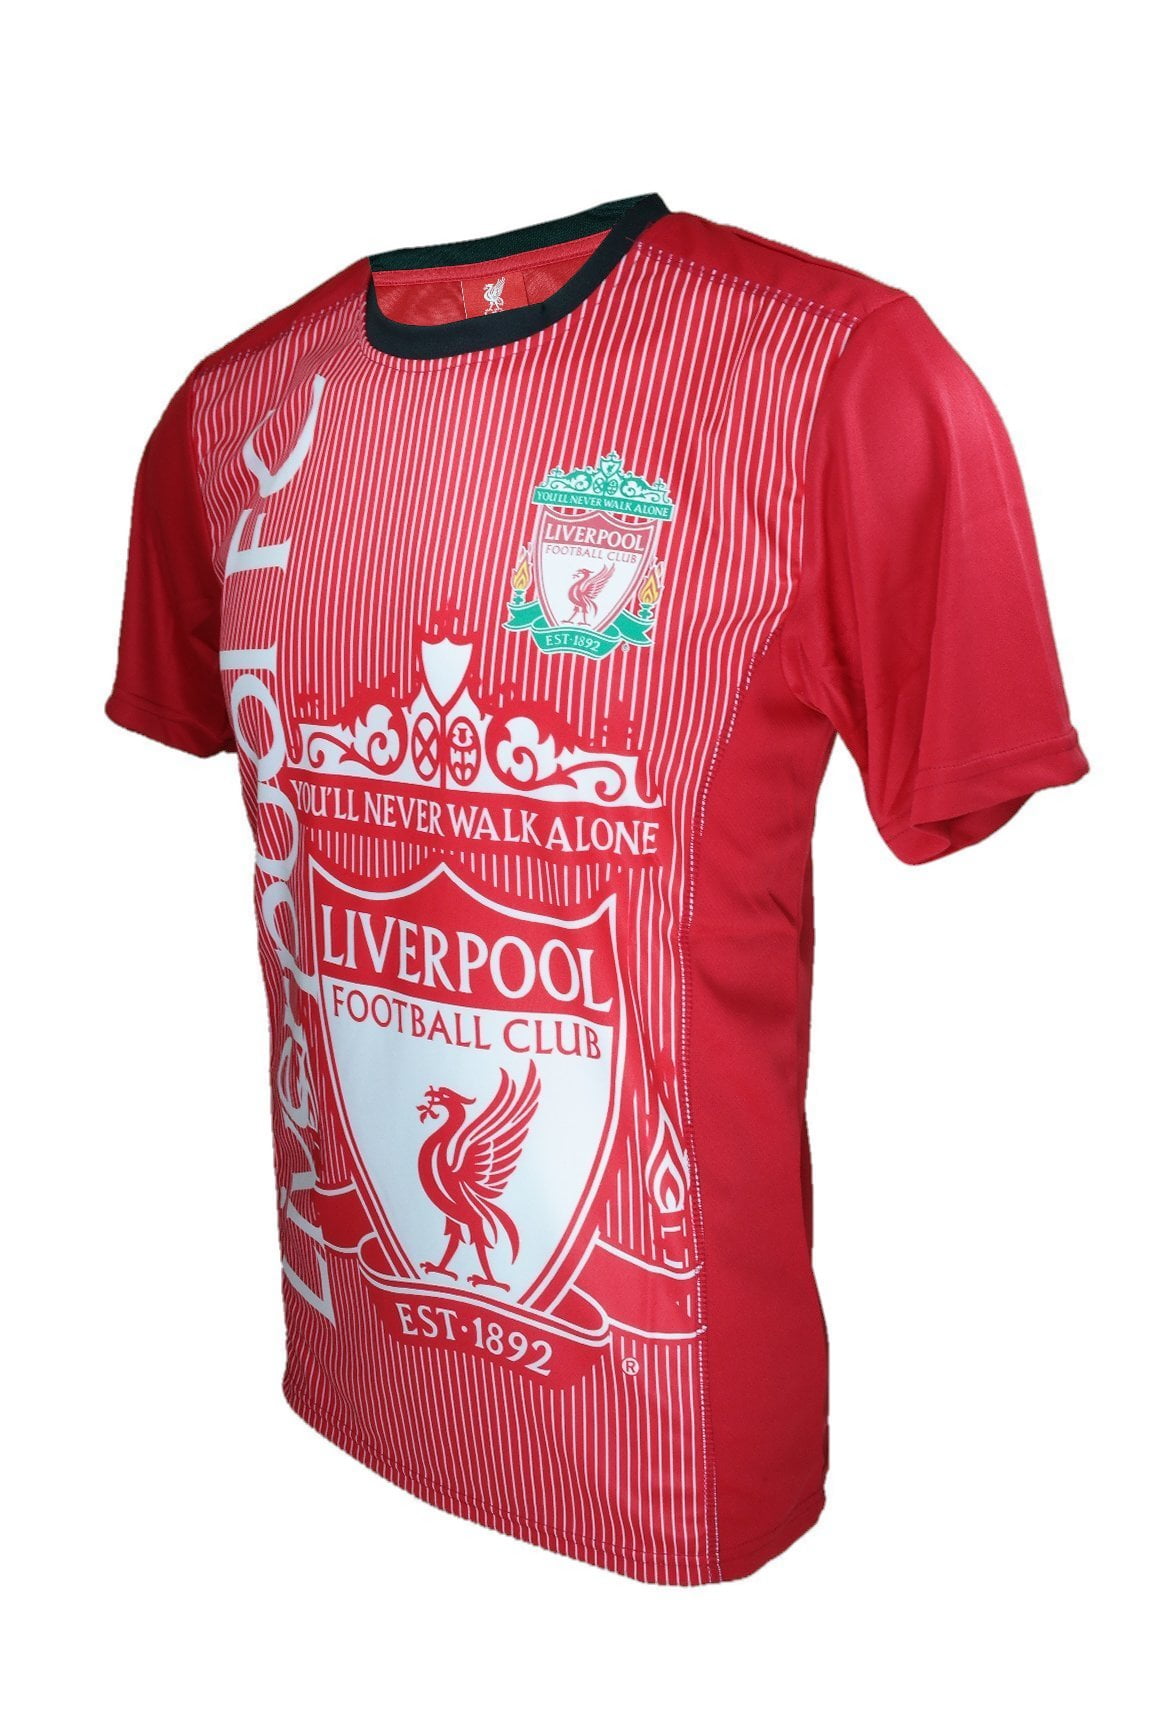 Soccer Official Adult Soccer Training Jersey J020 M Liverpool F.C 